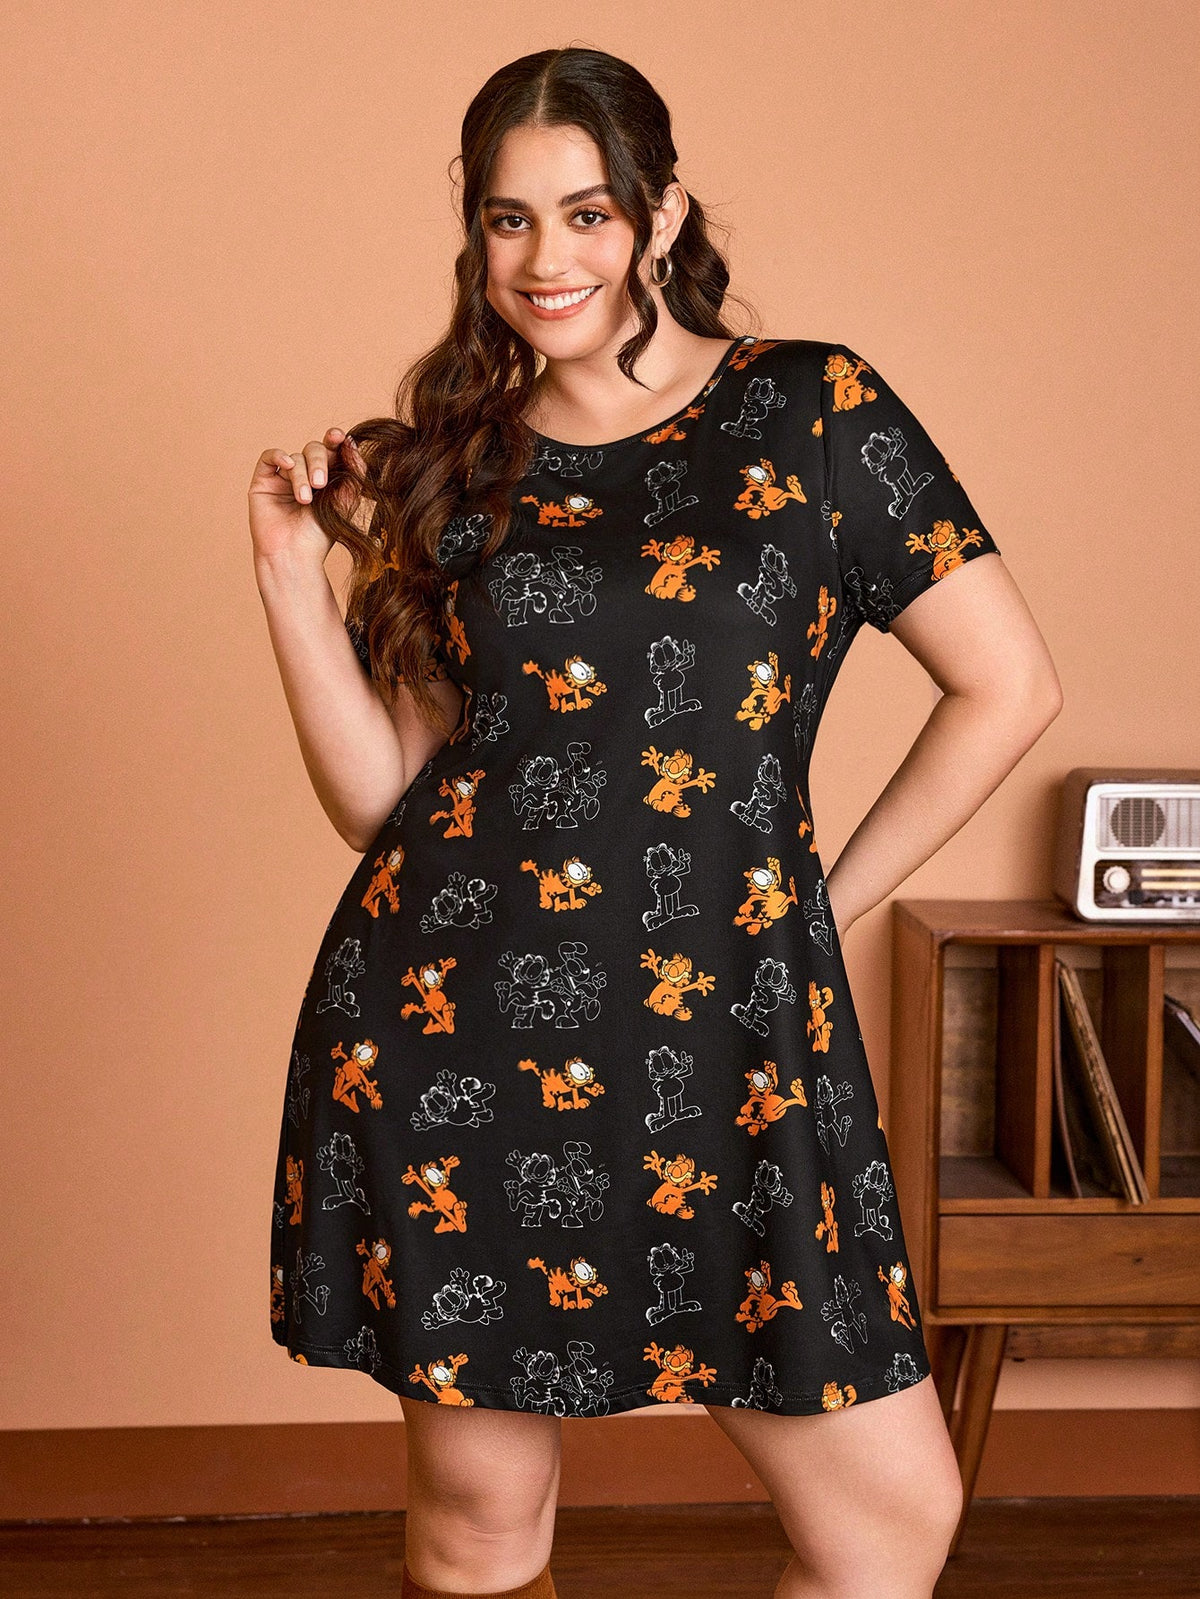 GARFIELD X  Plus Size Casual And Fashionable  Printed Summer T-Shirt Dress , Elastic Knit Fabric, For Women